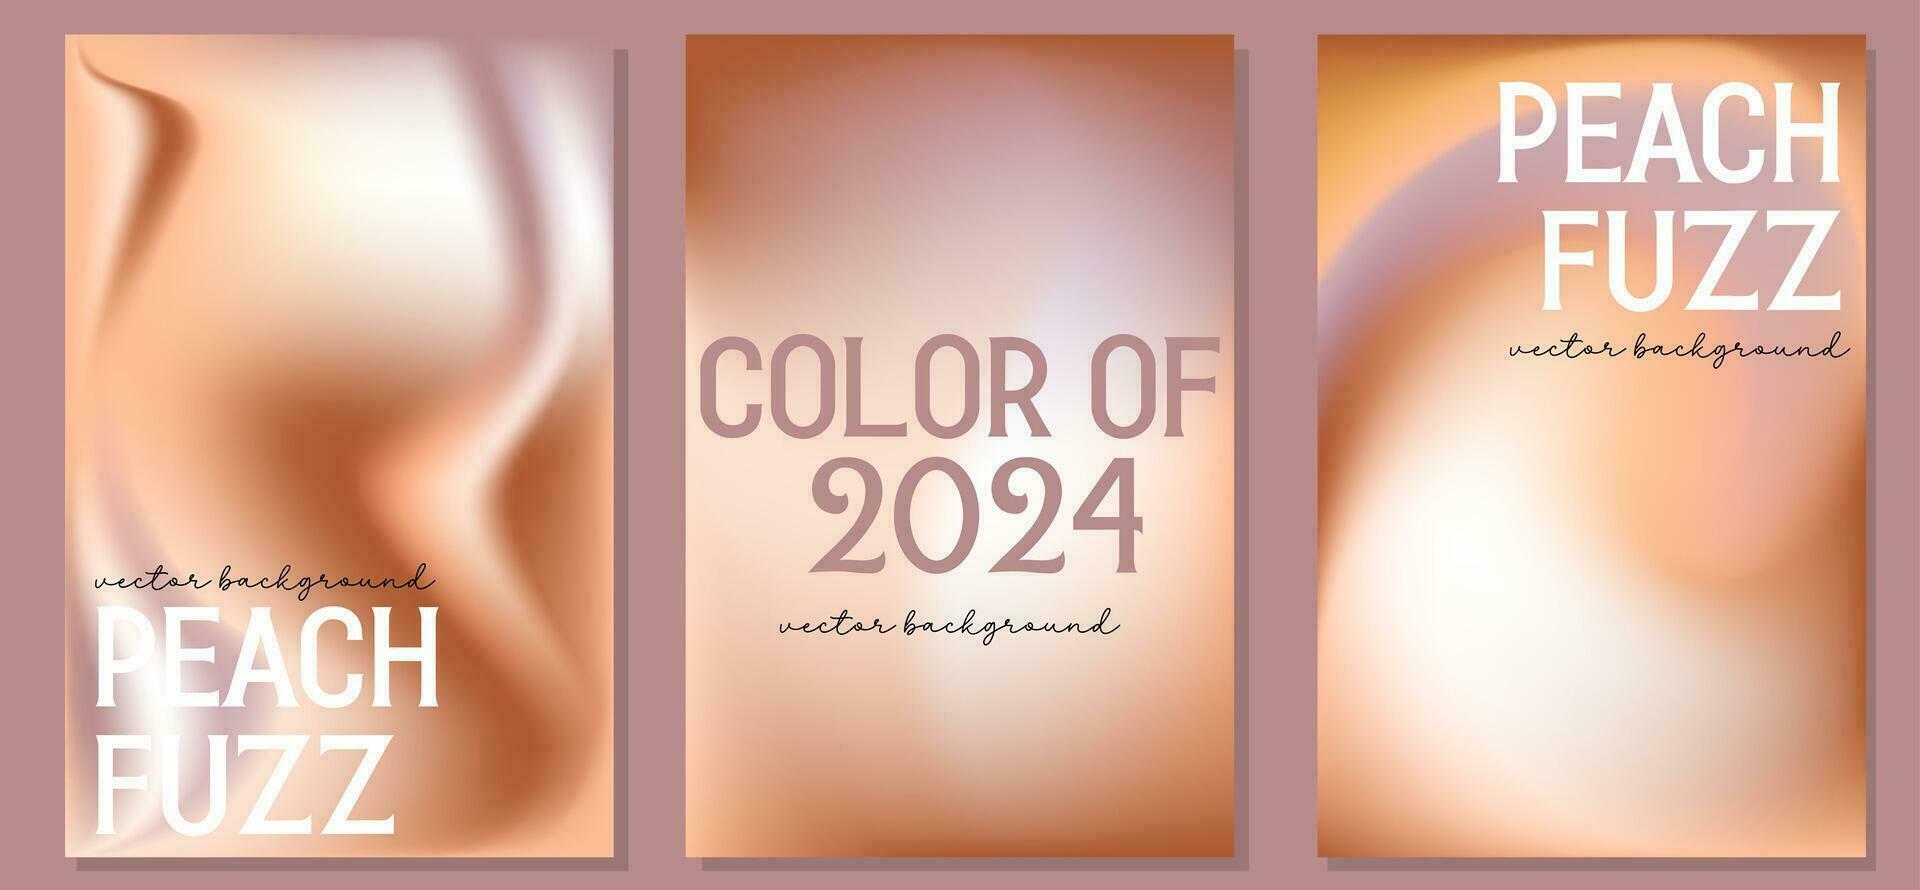 Set of gradient background in peach fuzz colors vector